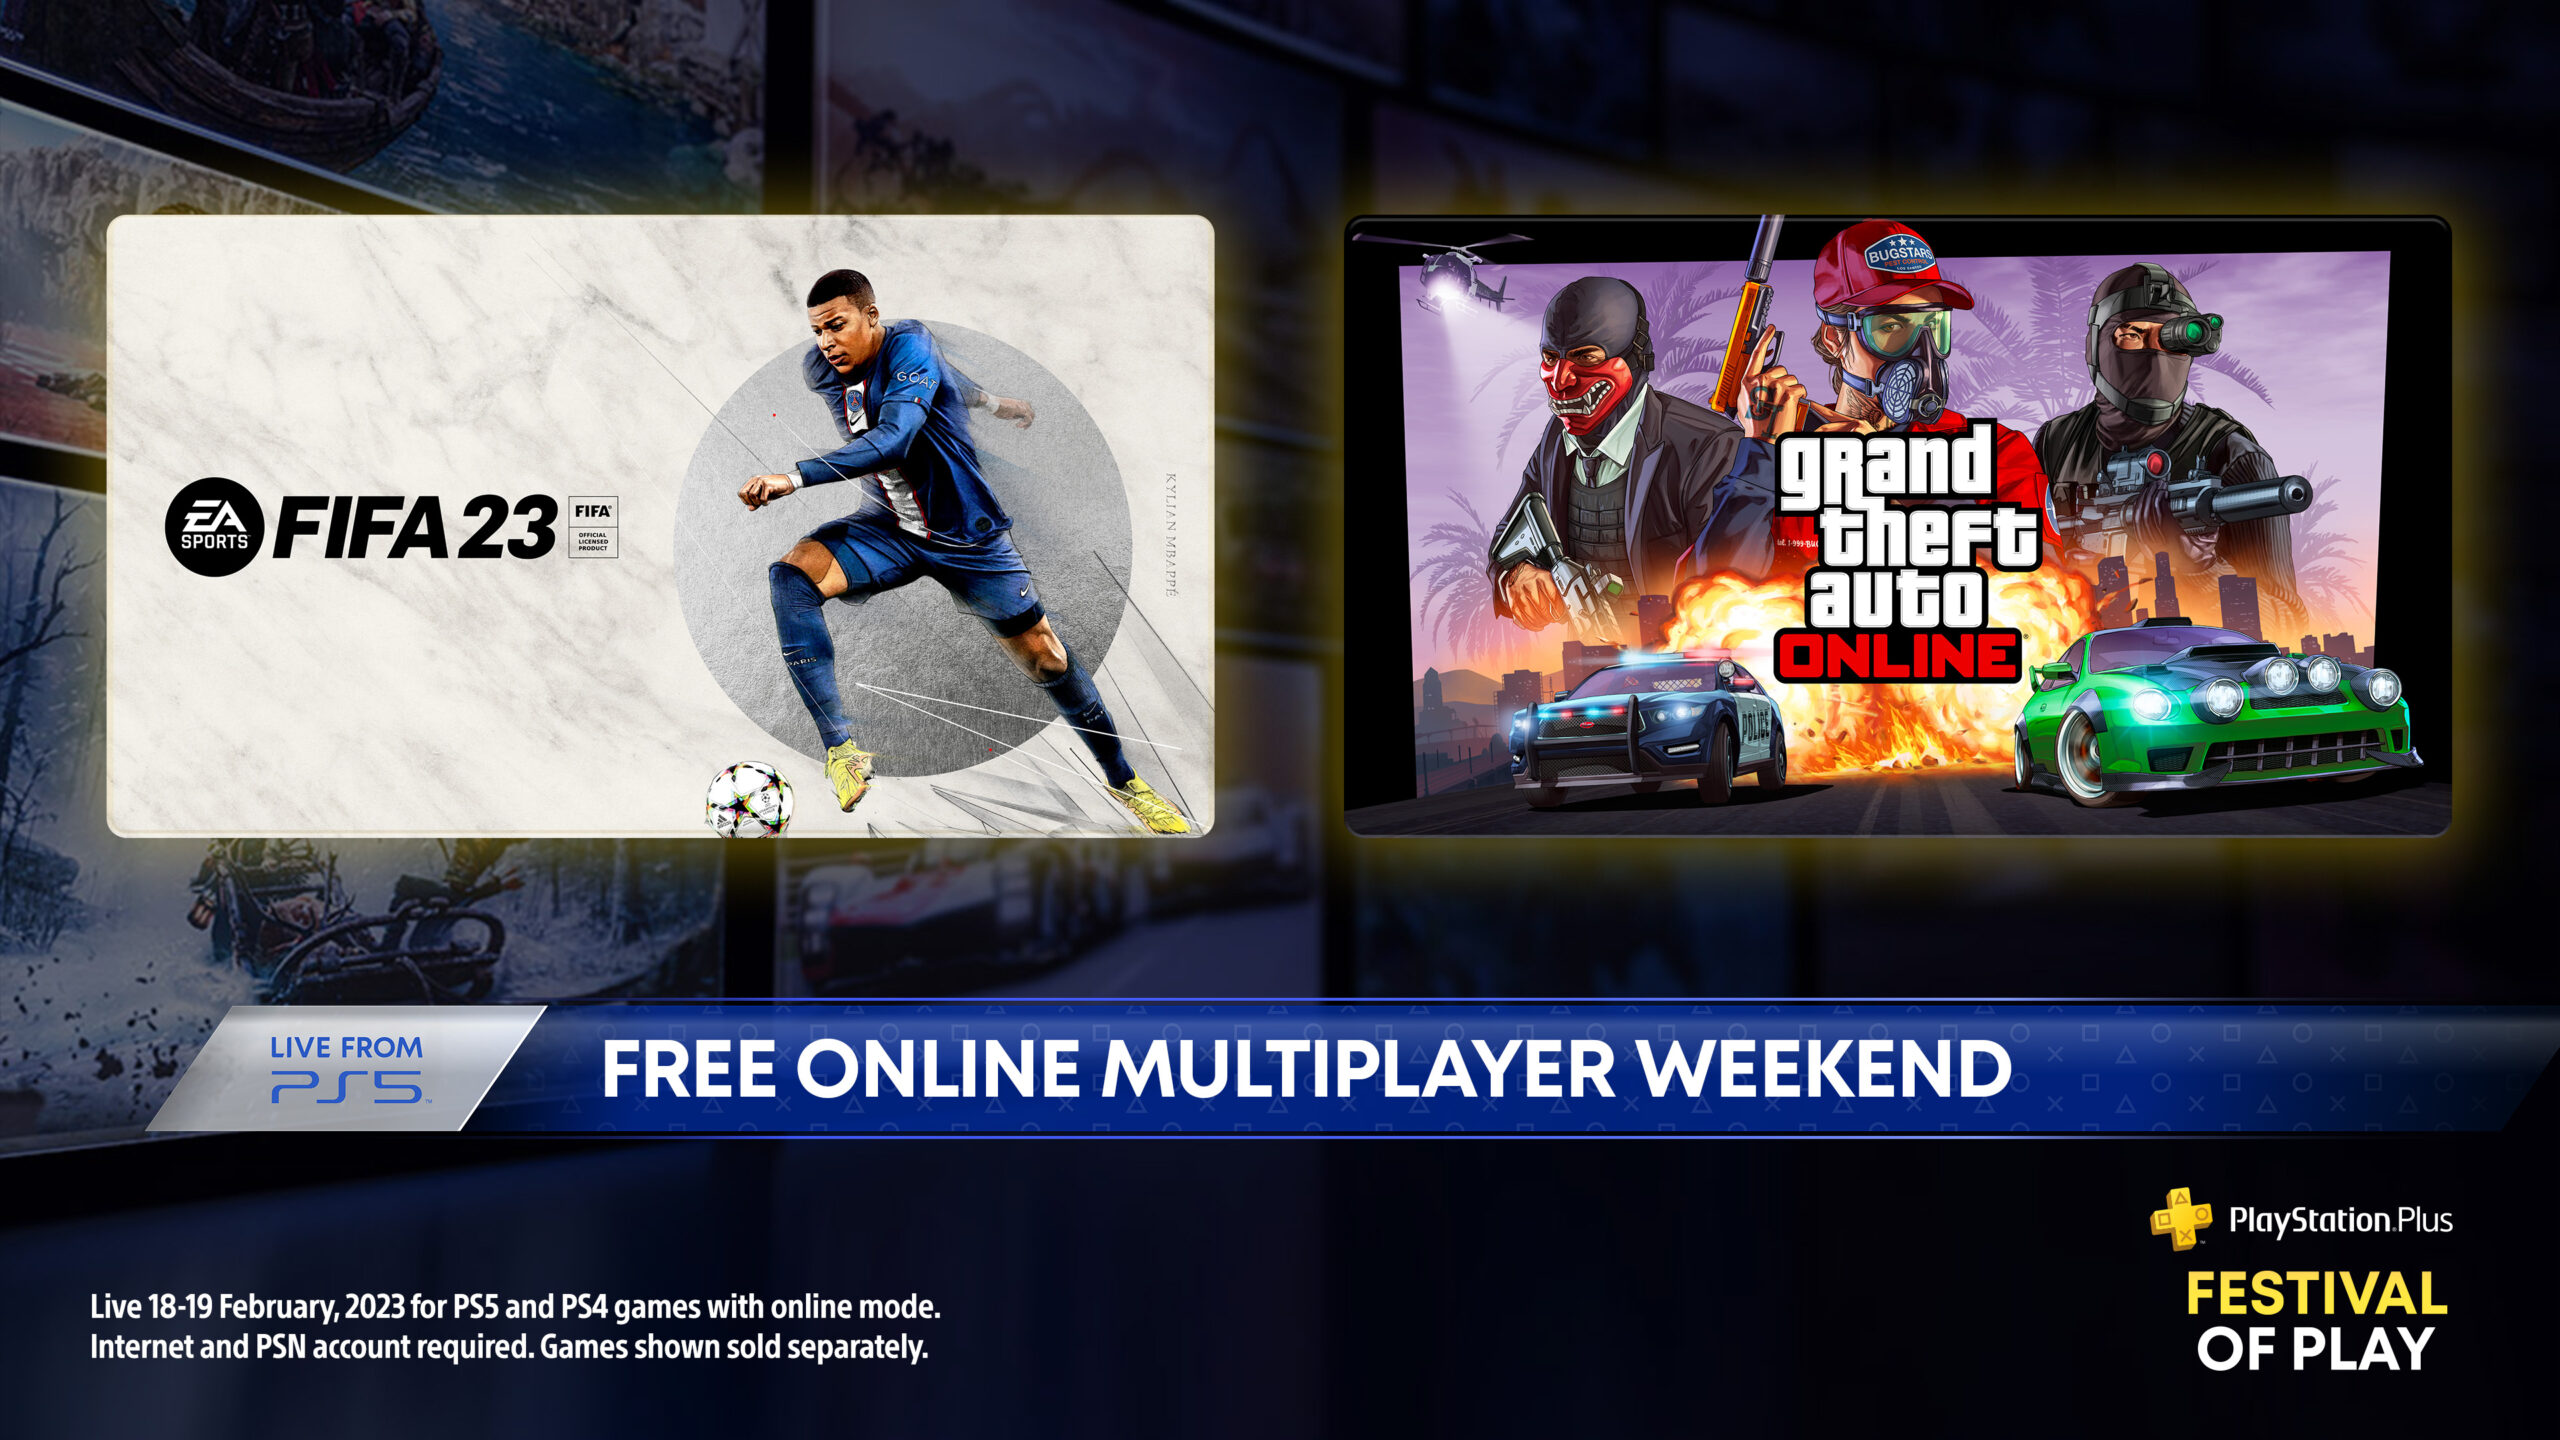 For Southeast Asia) Get ready, PlayStation Plus Season of Play starts  tomorrow – PlayStation.Blog